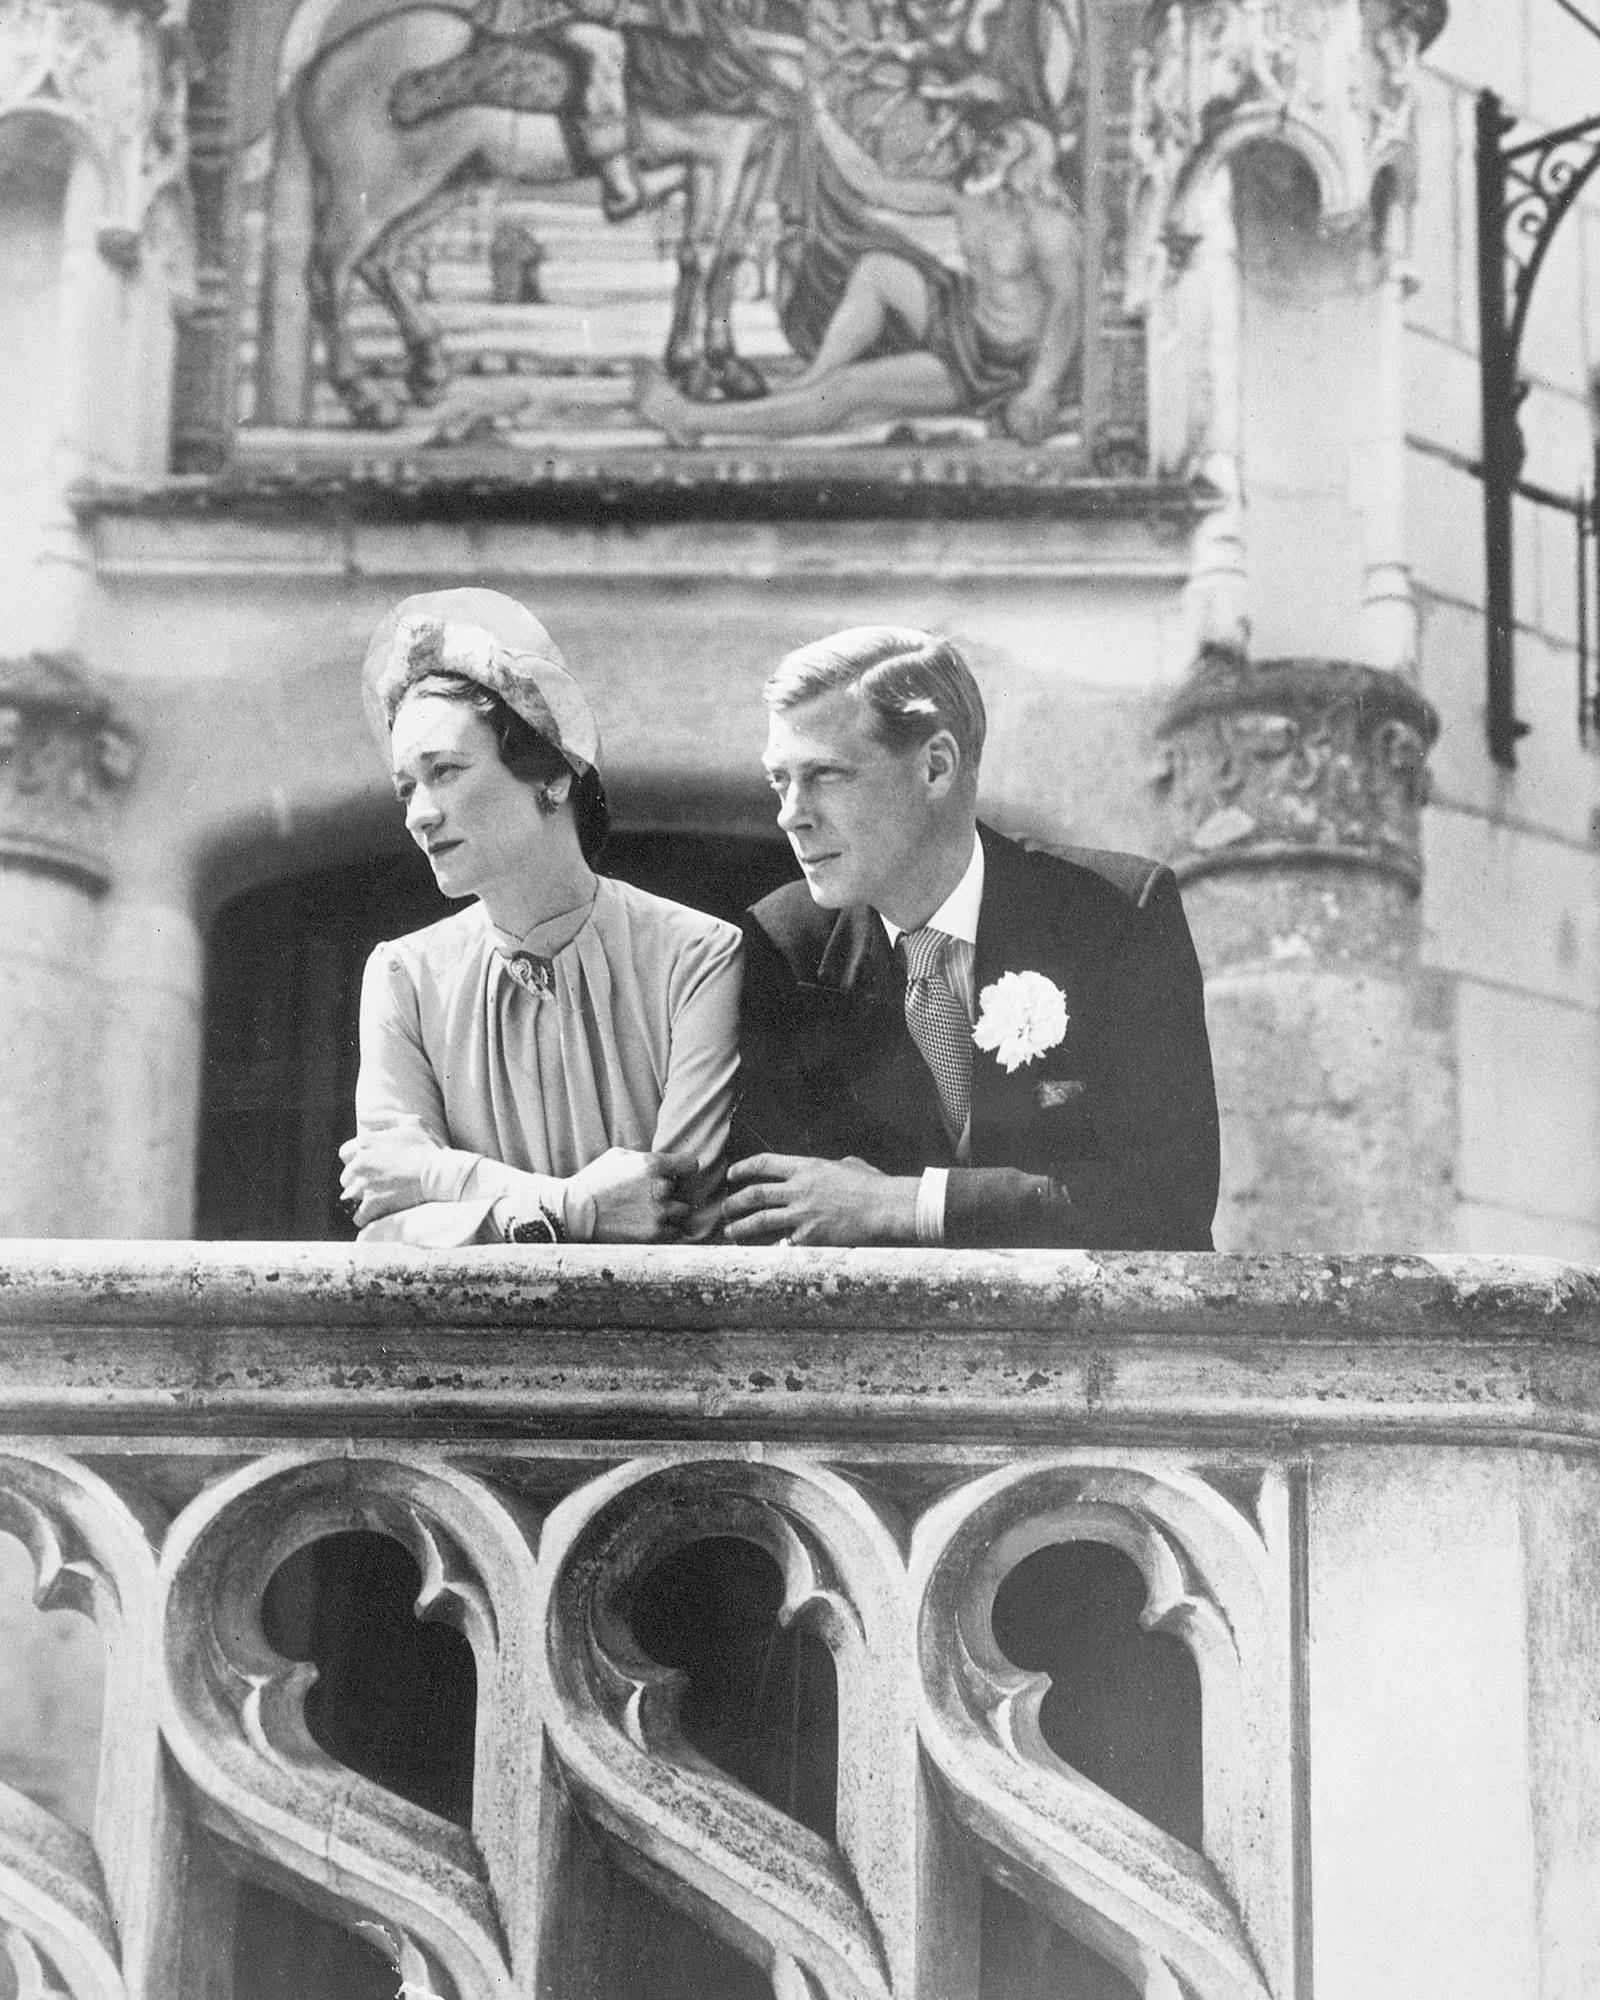 Cecil Beaton/Getty Images